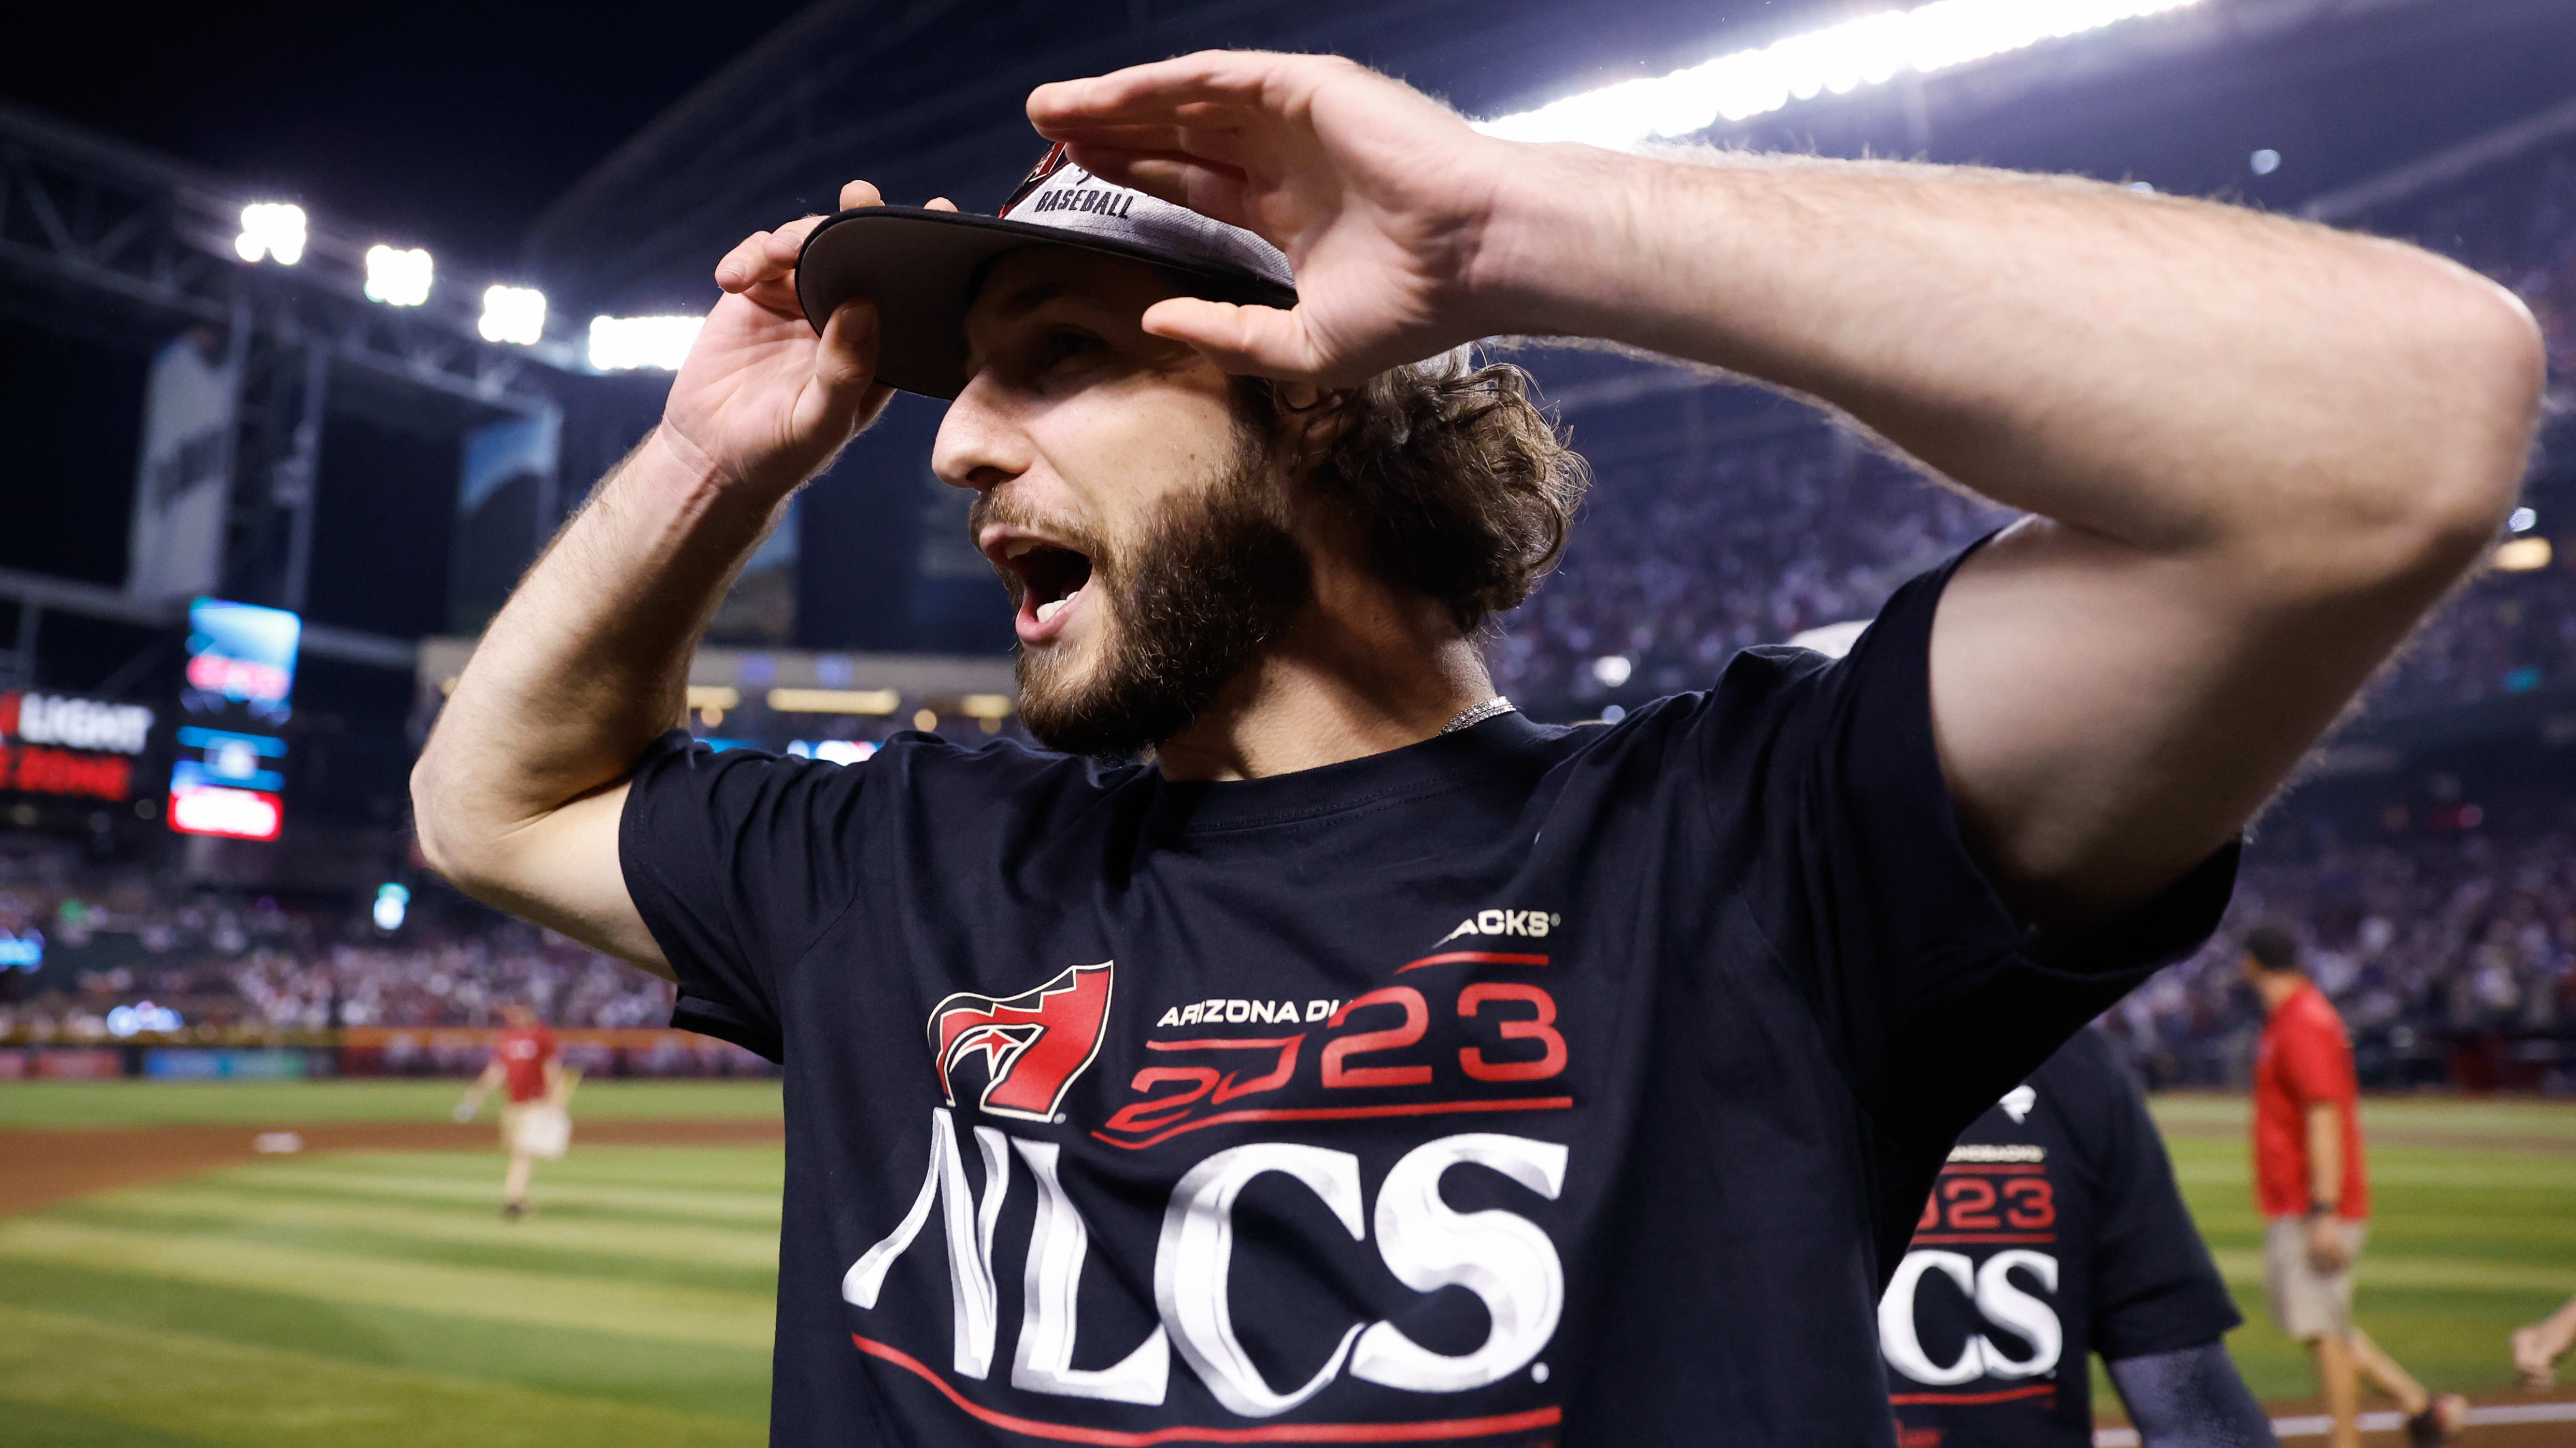 Zac Gallen celebrates after the D-backs advanced to the NLCS